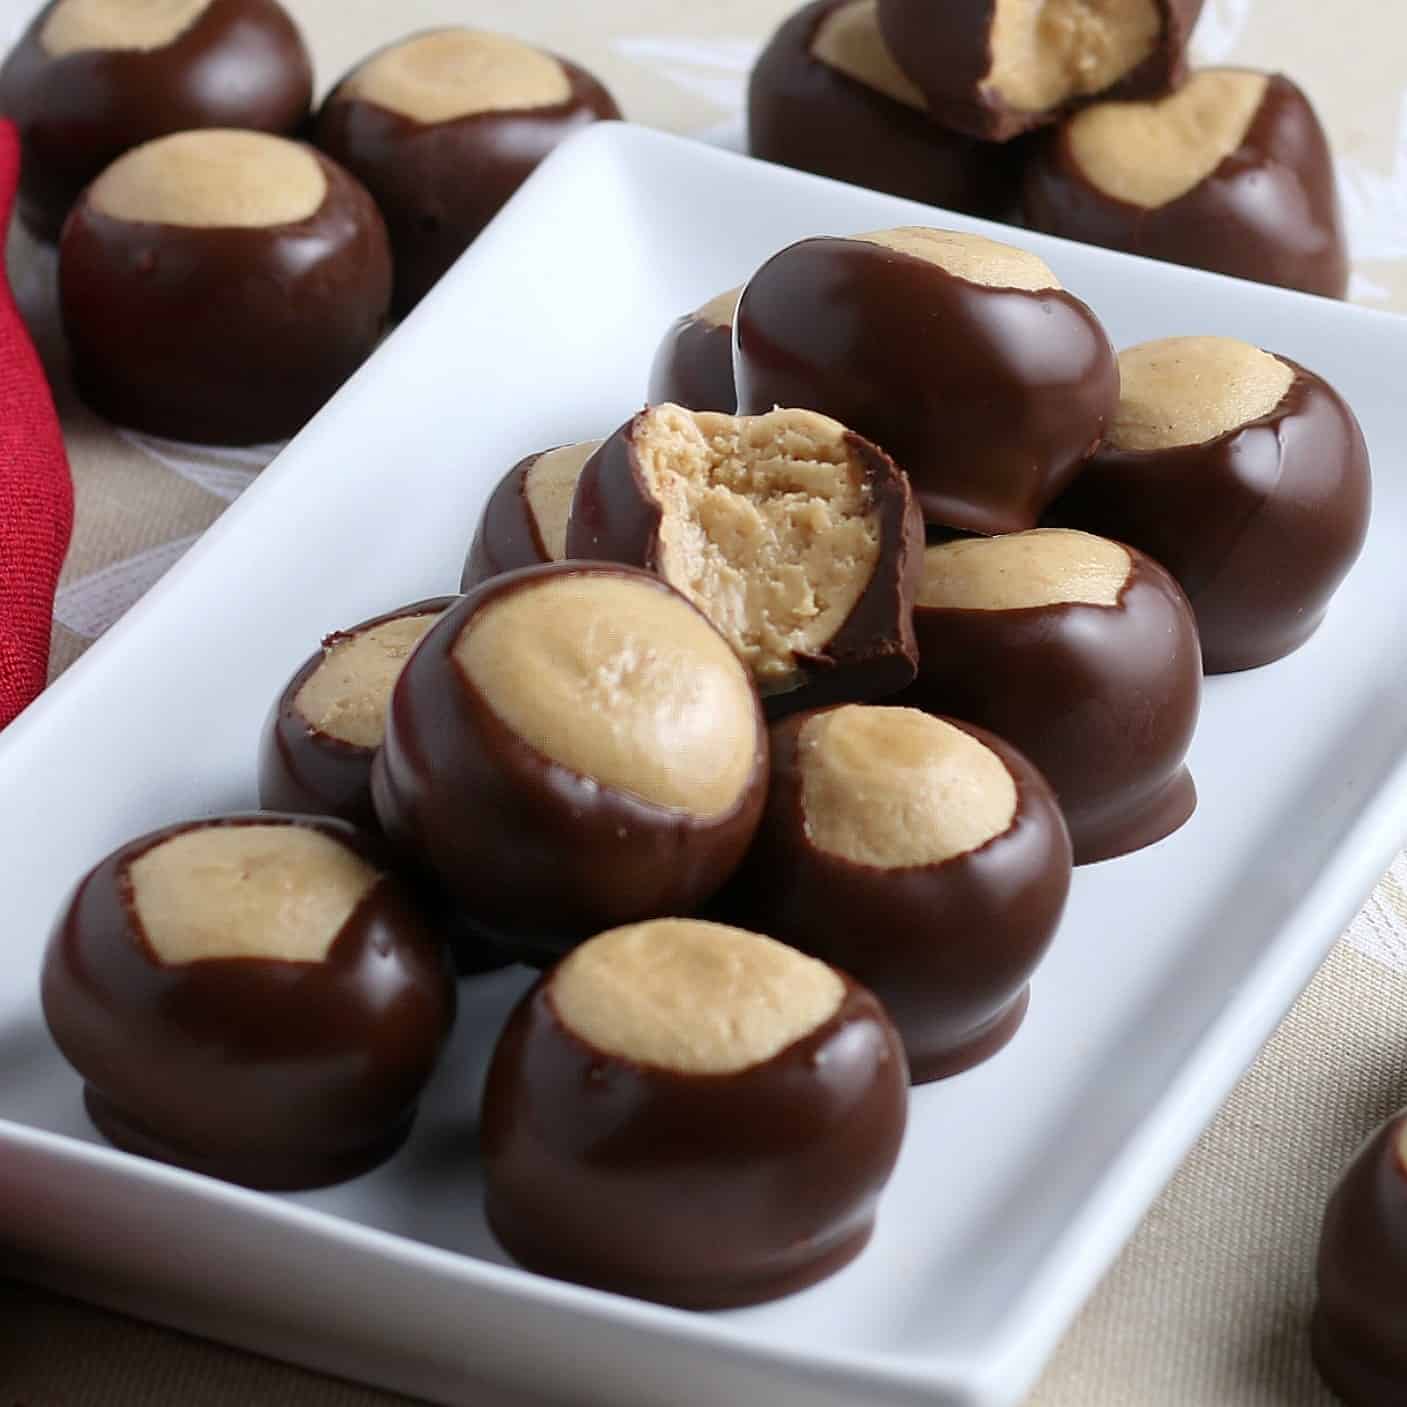 Buckeye candy recipe lined up on a rectangular plate.